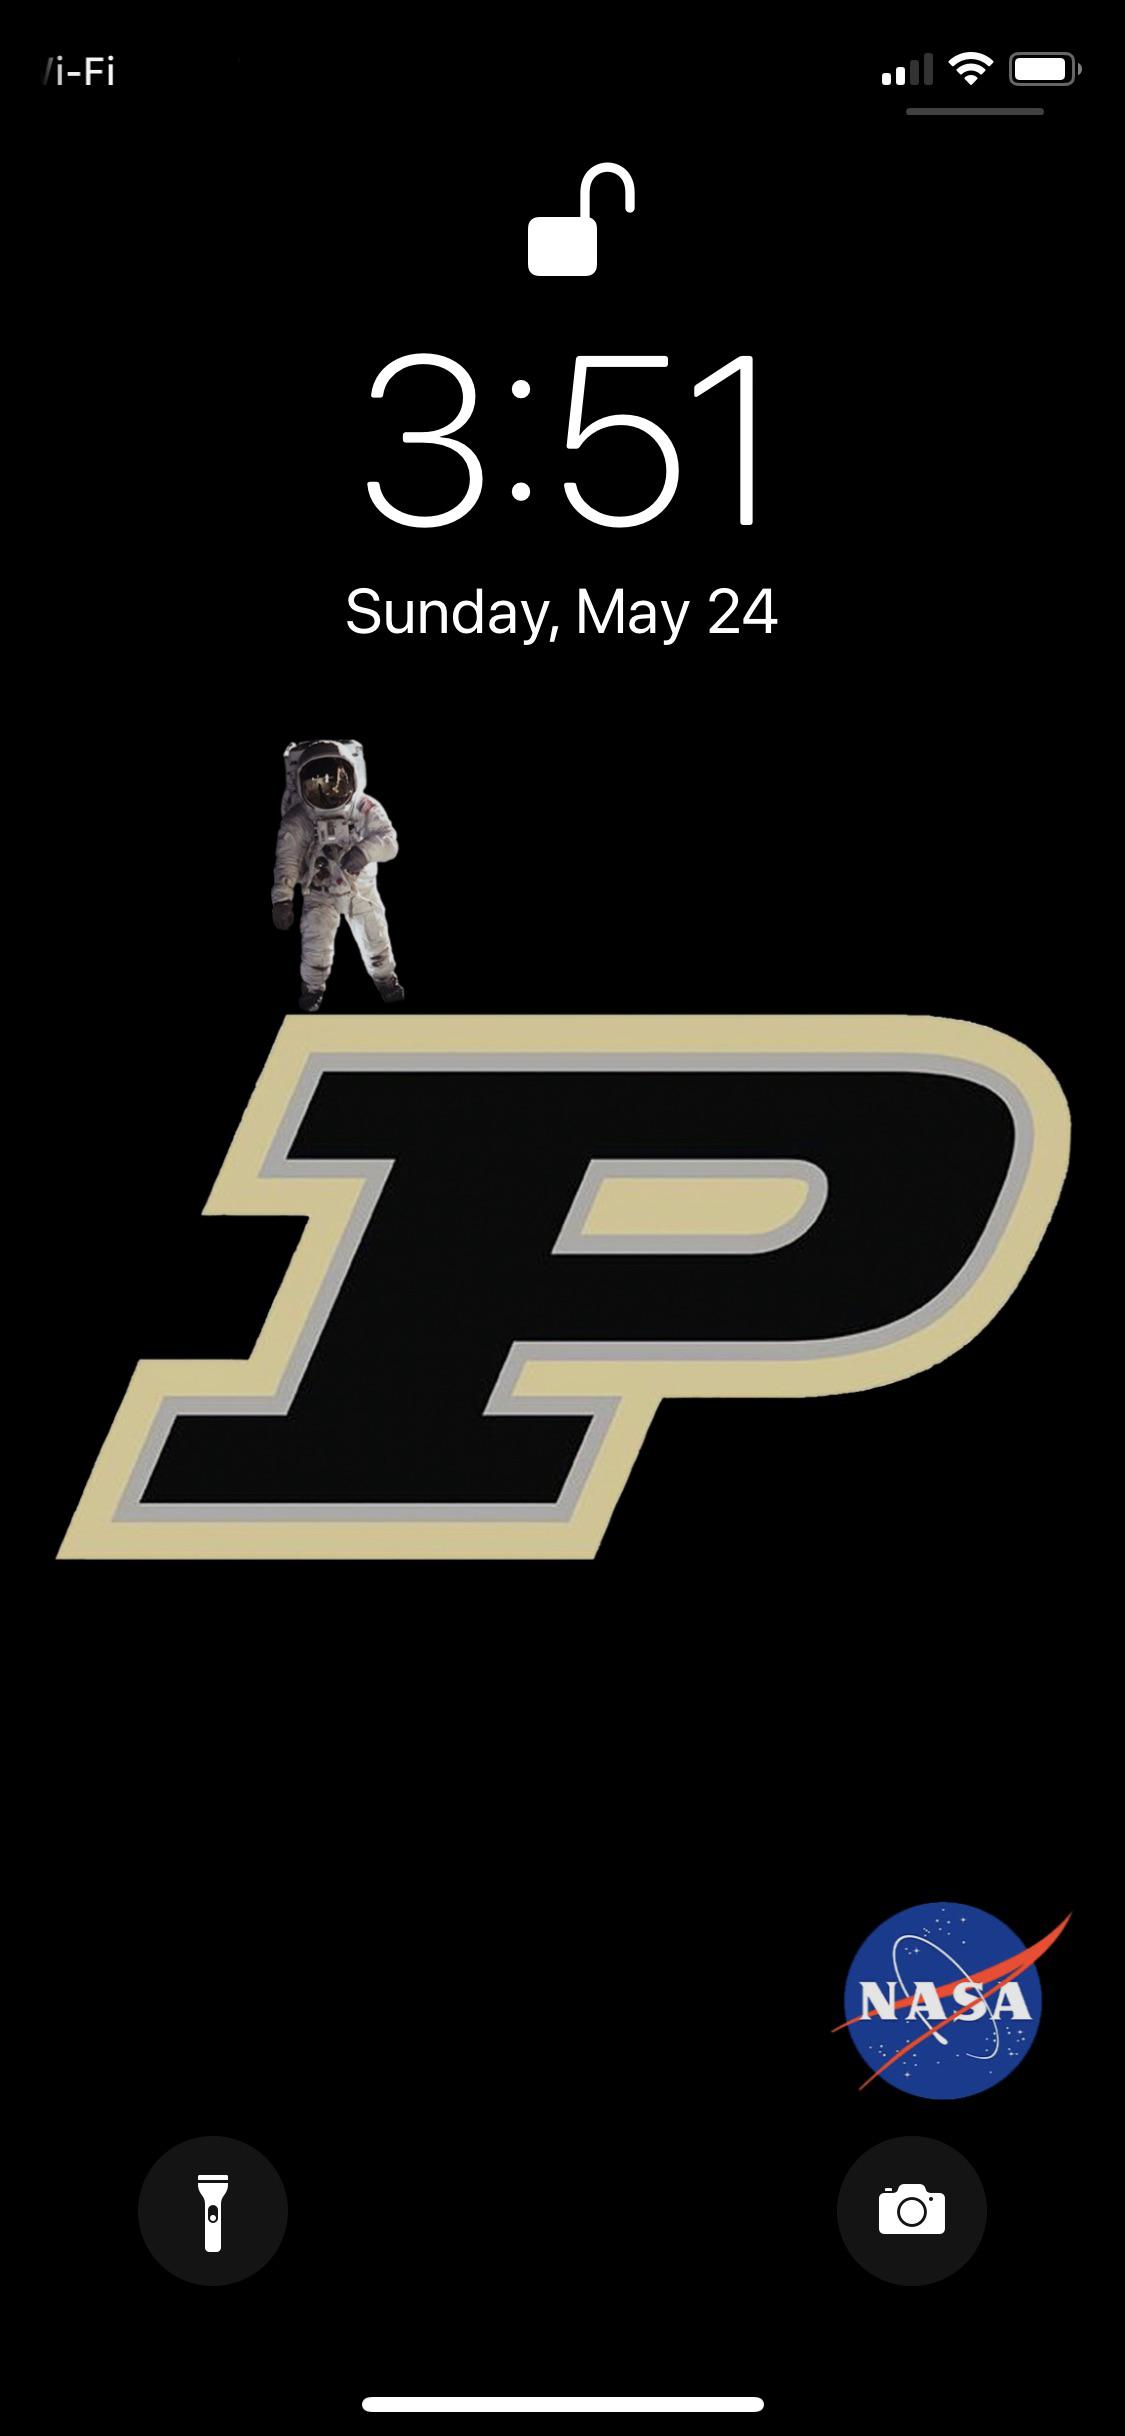 Purdue Mens Basketball  on Twitter  Wednesday night wallpapers  BoilerUp  MarchMadness httpstco1wbzwBwVD4  Twitter